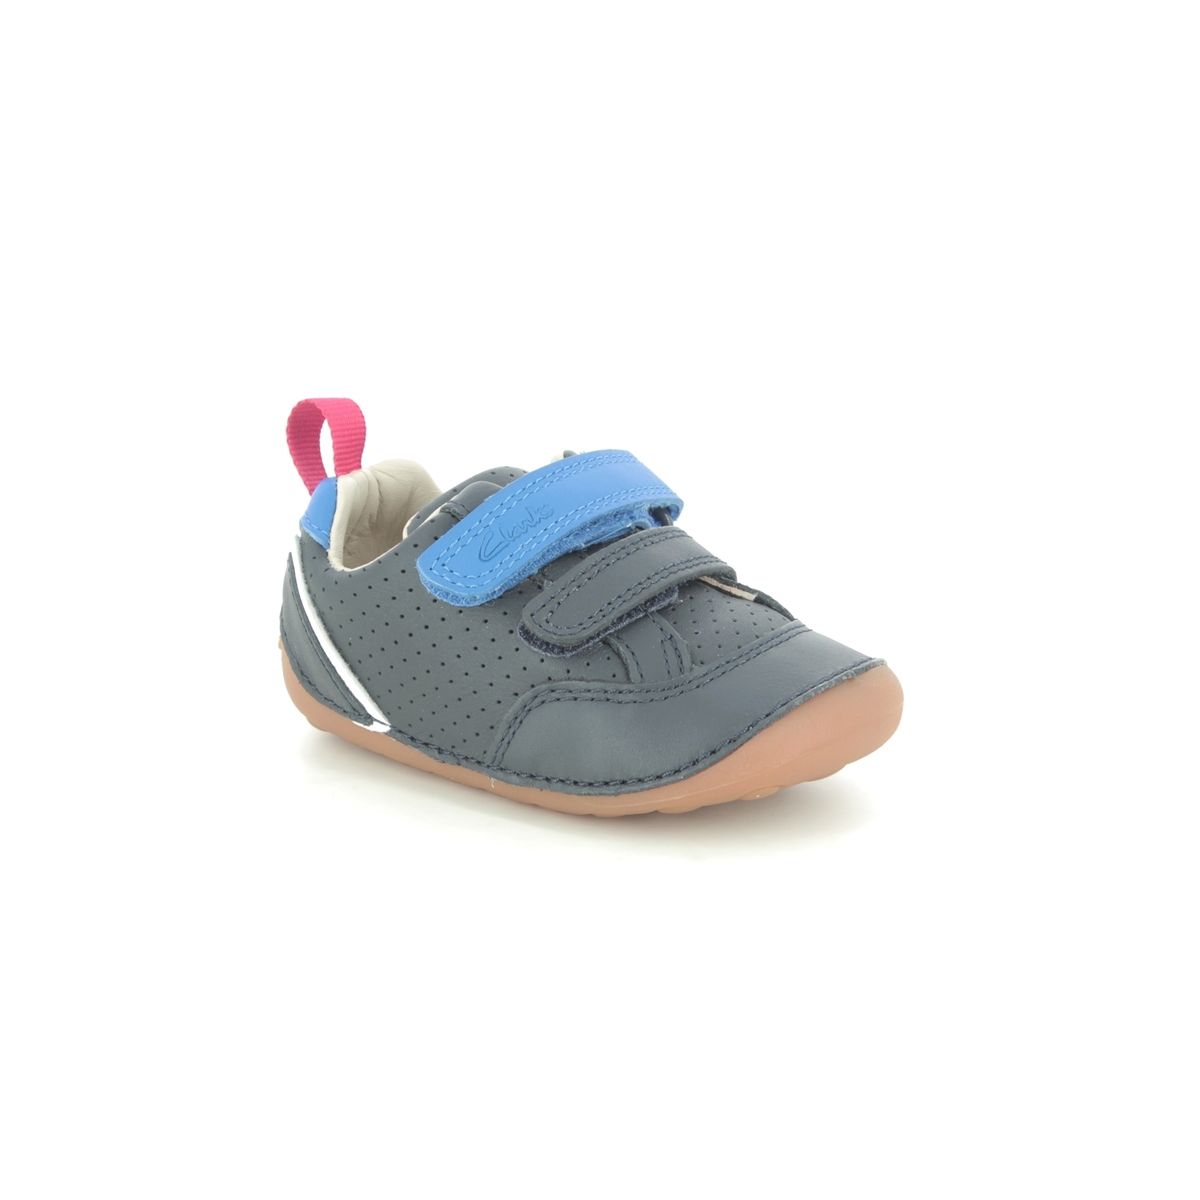 Clarks Tiny Sky T Navy Leather Kids Boys First And Toddler 576297G In Size 5 In Plain Navy Leather G Width Fitting For kids